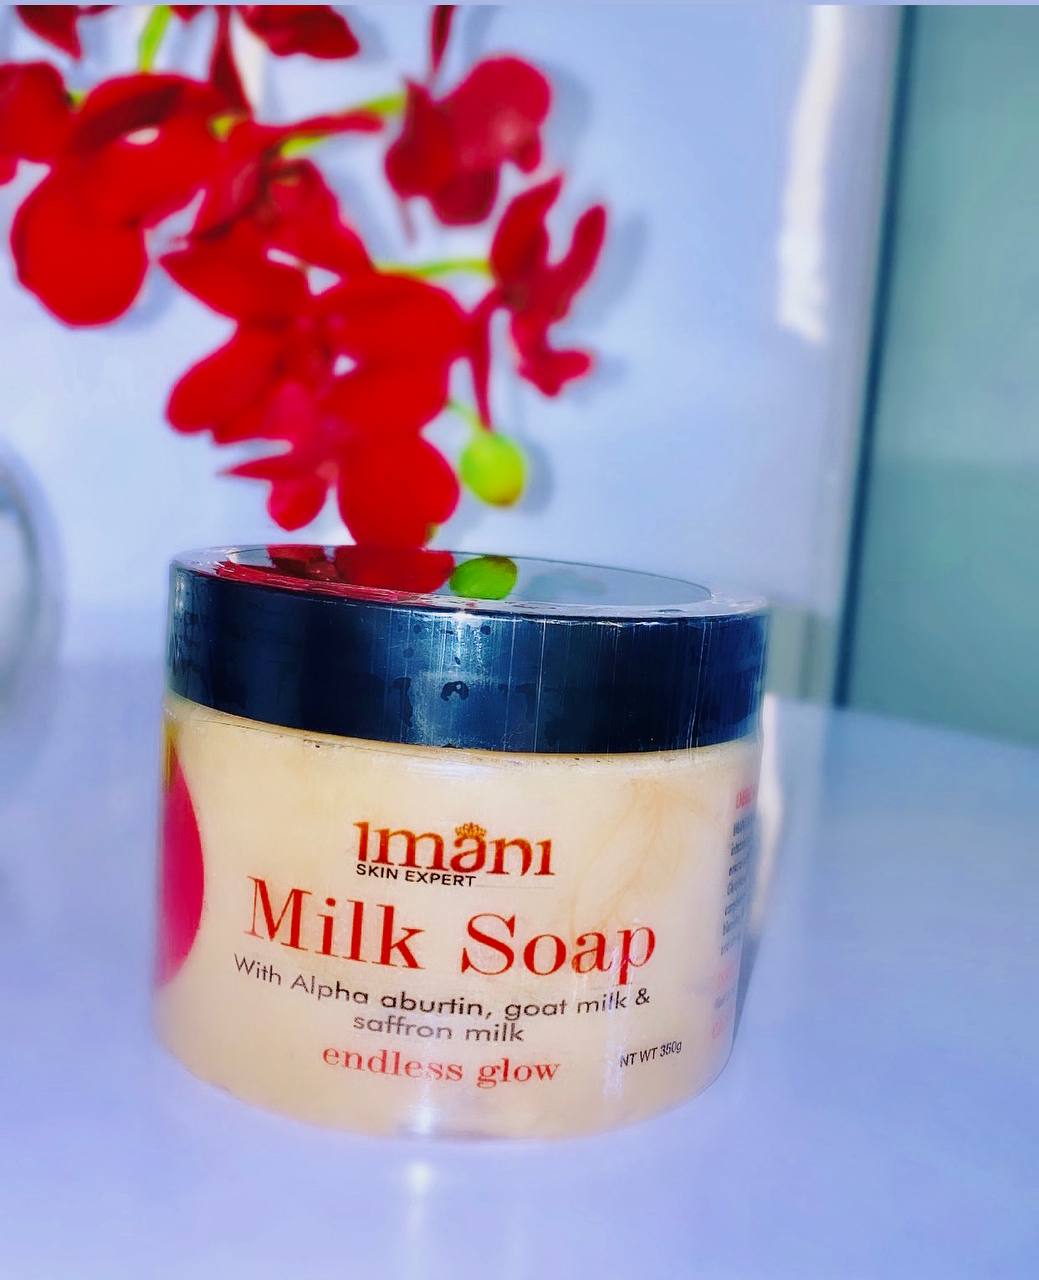 Buy Milk Soap Online. Enjoy safe shopping online with our ecommerce. ✓ Best Price in Nigeria ✓ Fast Delivery & Express delivery Available. Also available at the Lagos and Abuja offices of Imani Aesthetic and Laser Clinic